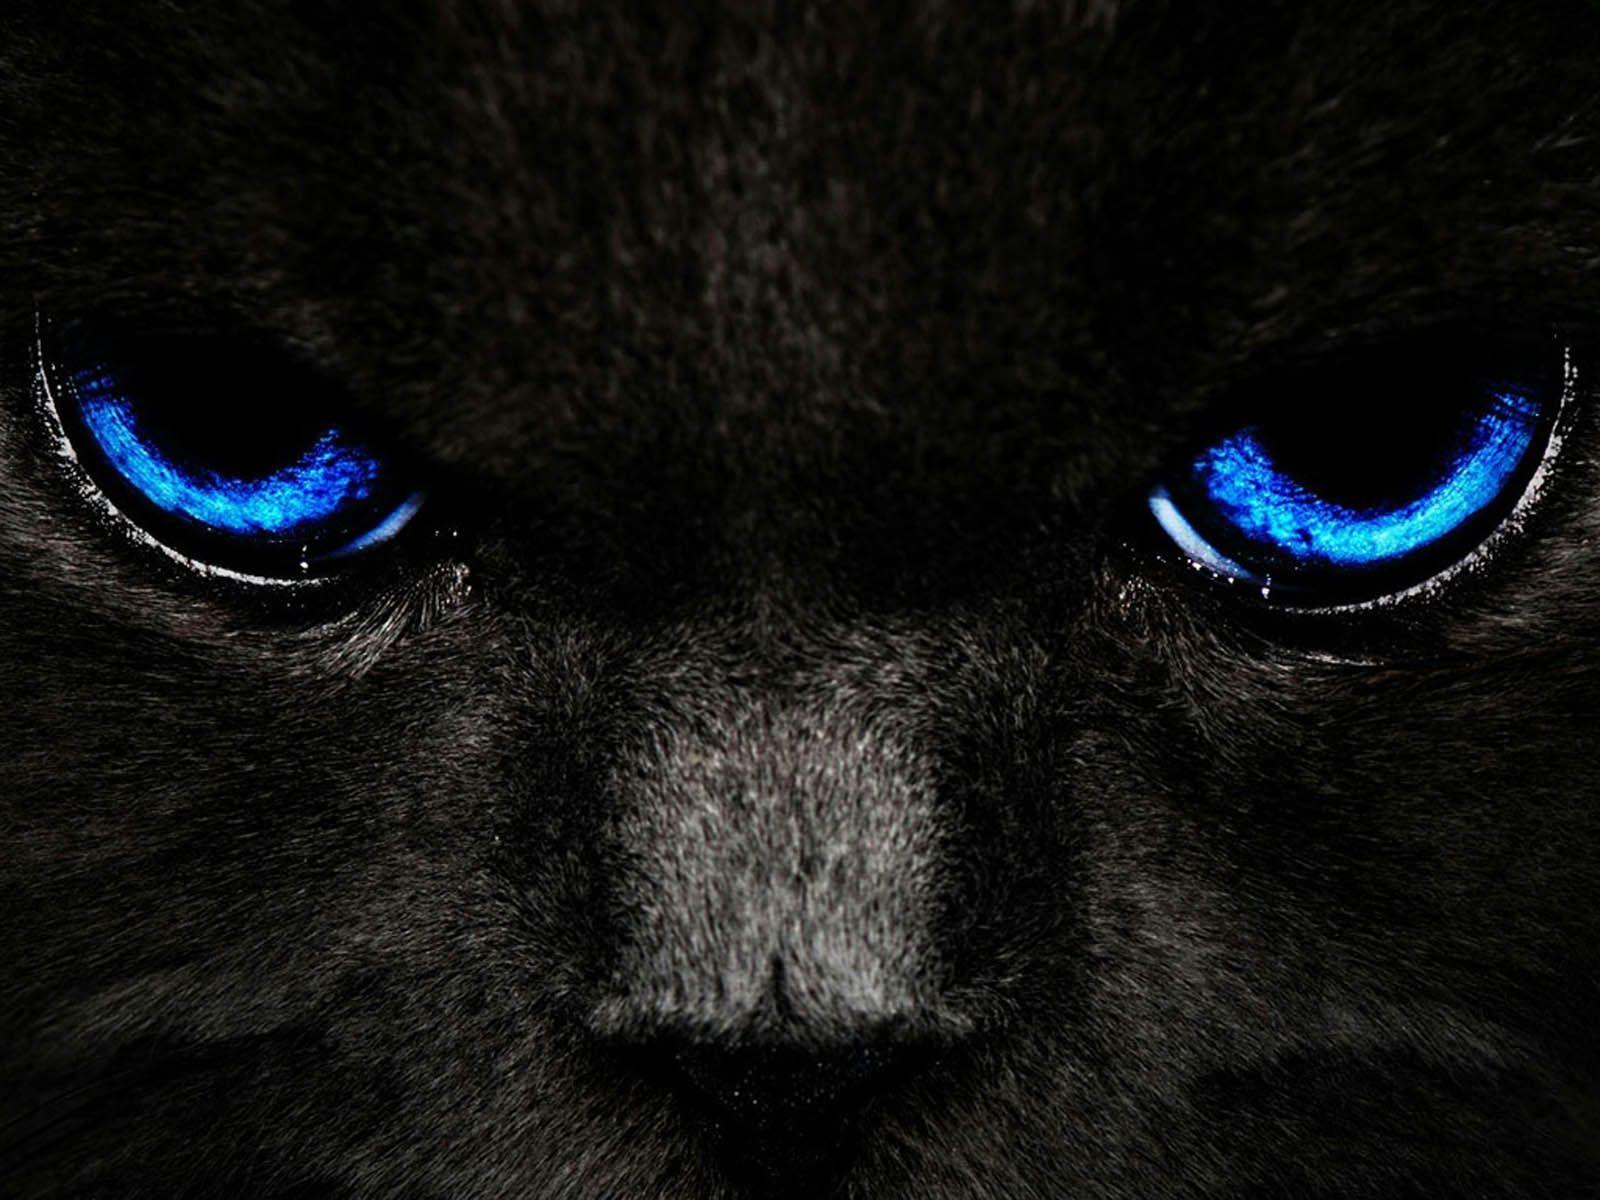 Black Cat with Blue Eyes. BLACK CATS. Black cats, Blue